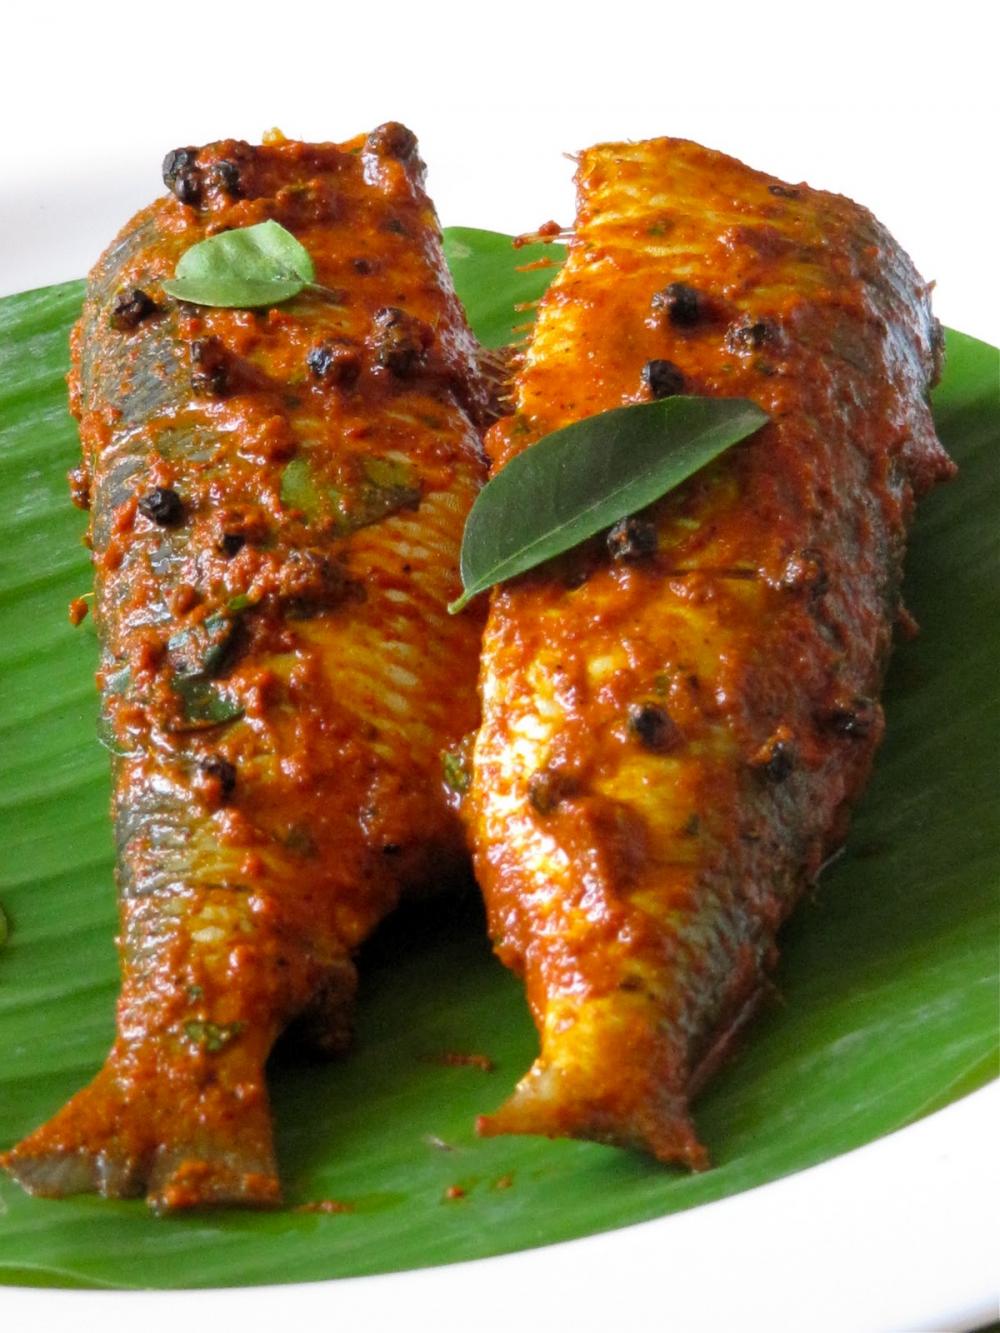 Main Attraction of this Odiya Meal, Fish cooked with local spices